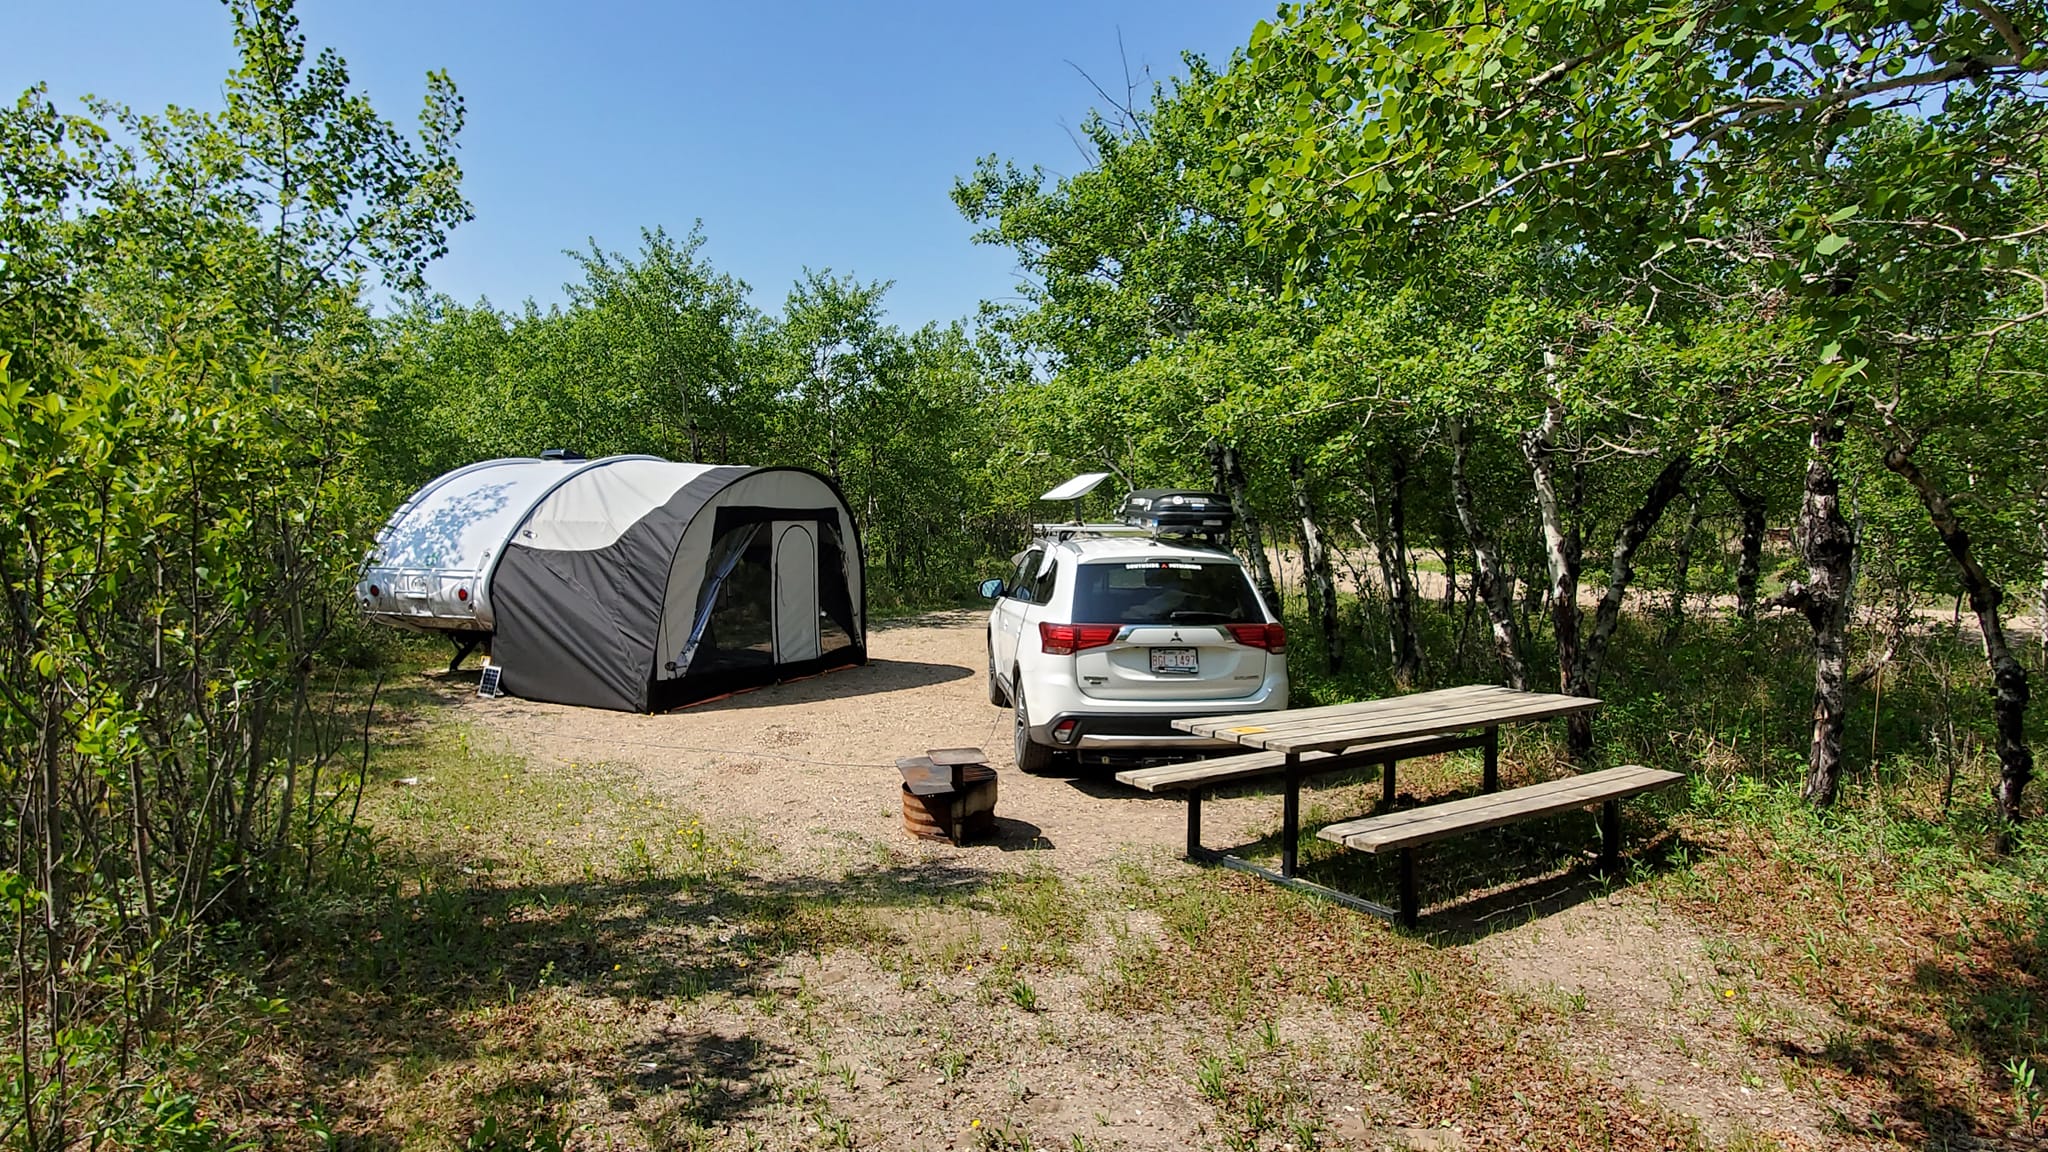 EG spent almost two months at Dillberry Lake Provincial Park on the Alberta/Saskatchewan border.(Her campsite turned out to be a black bear corridor till she set up a solar-powered motion-activated light.).